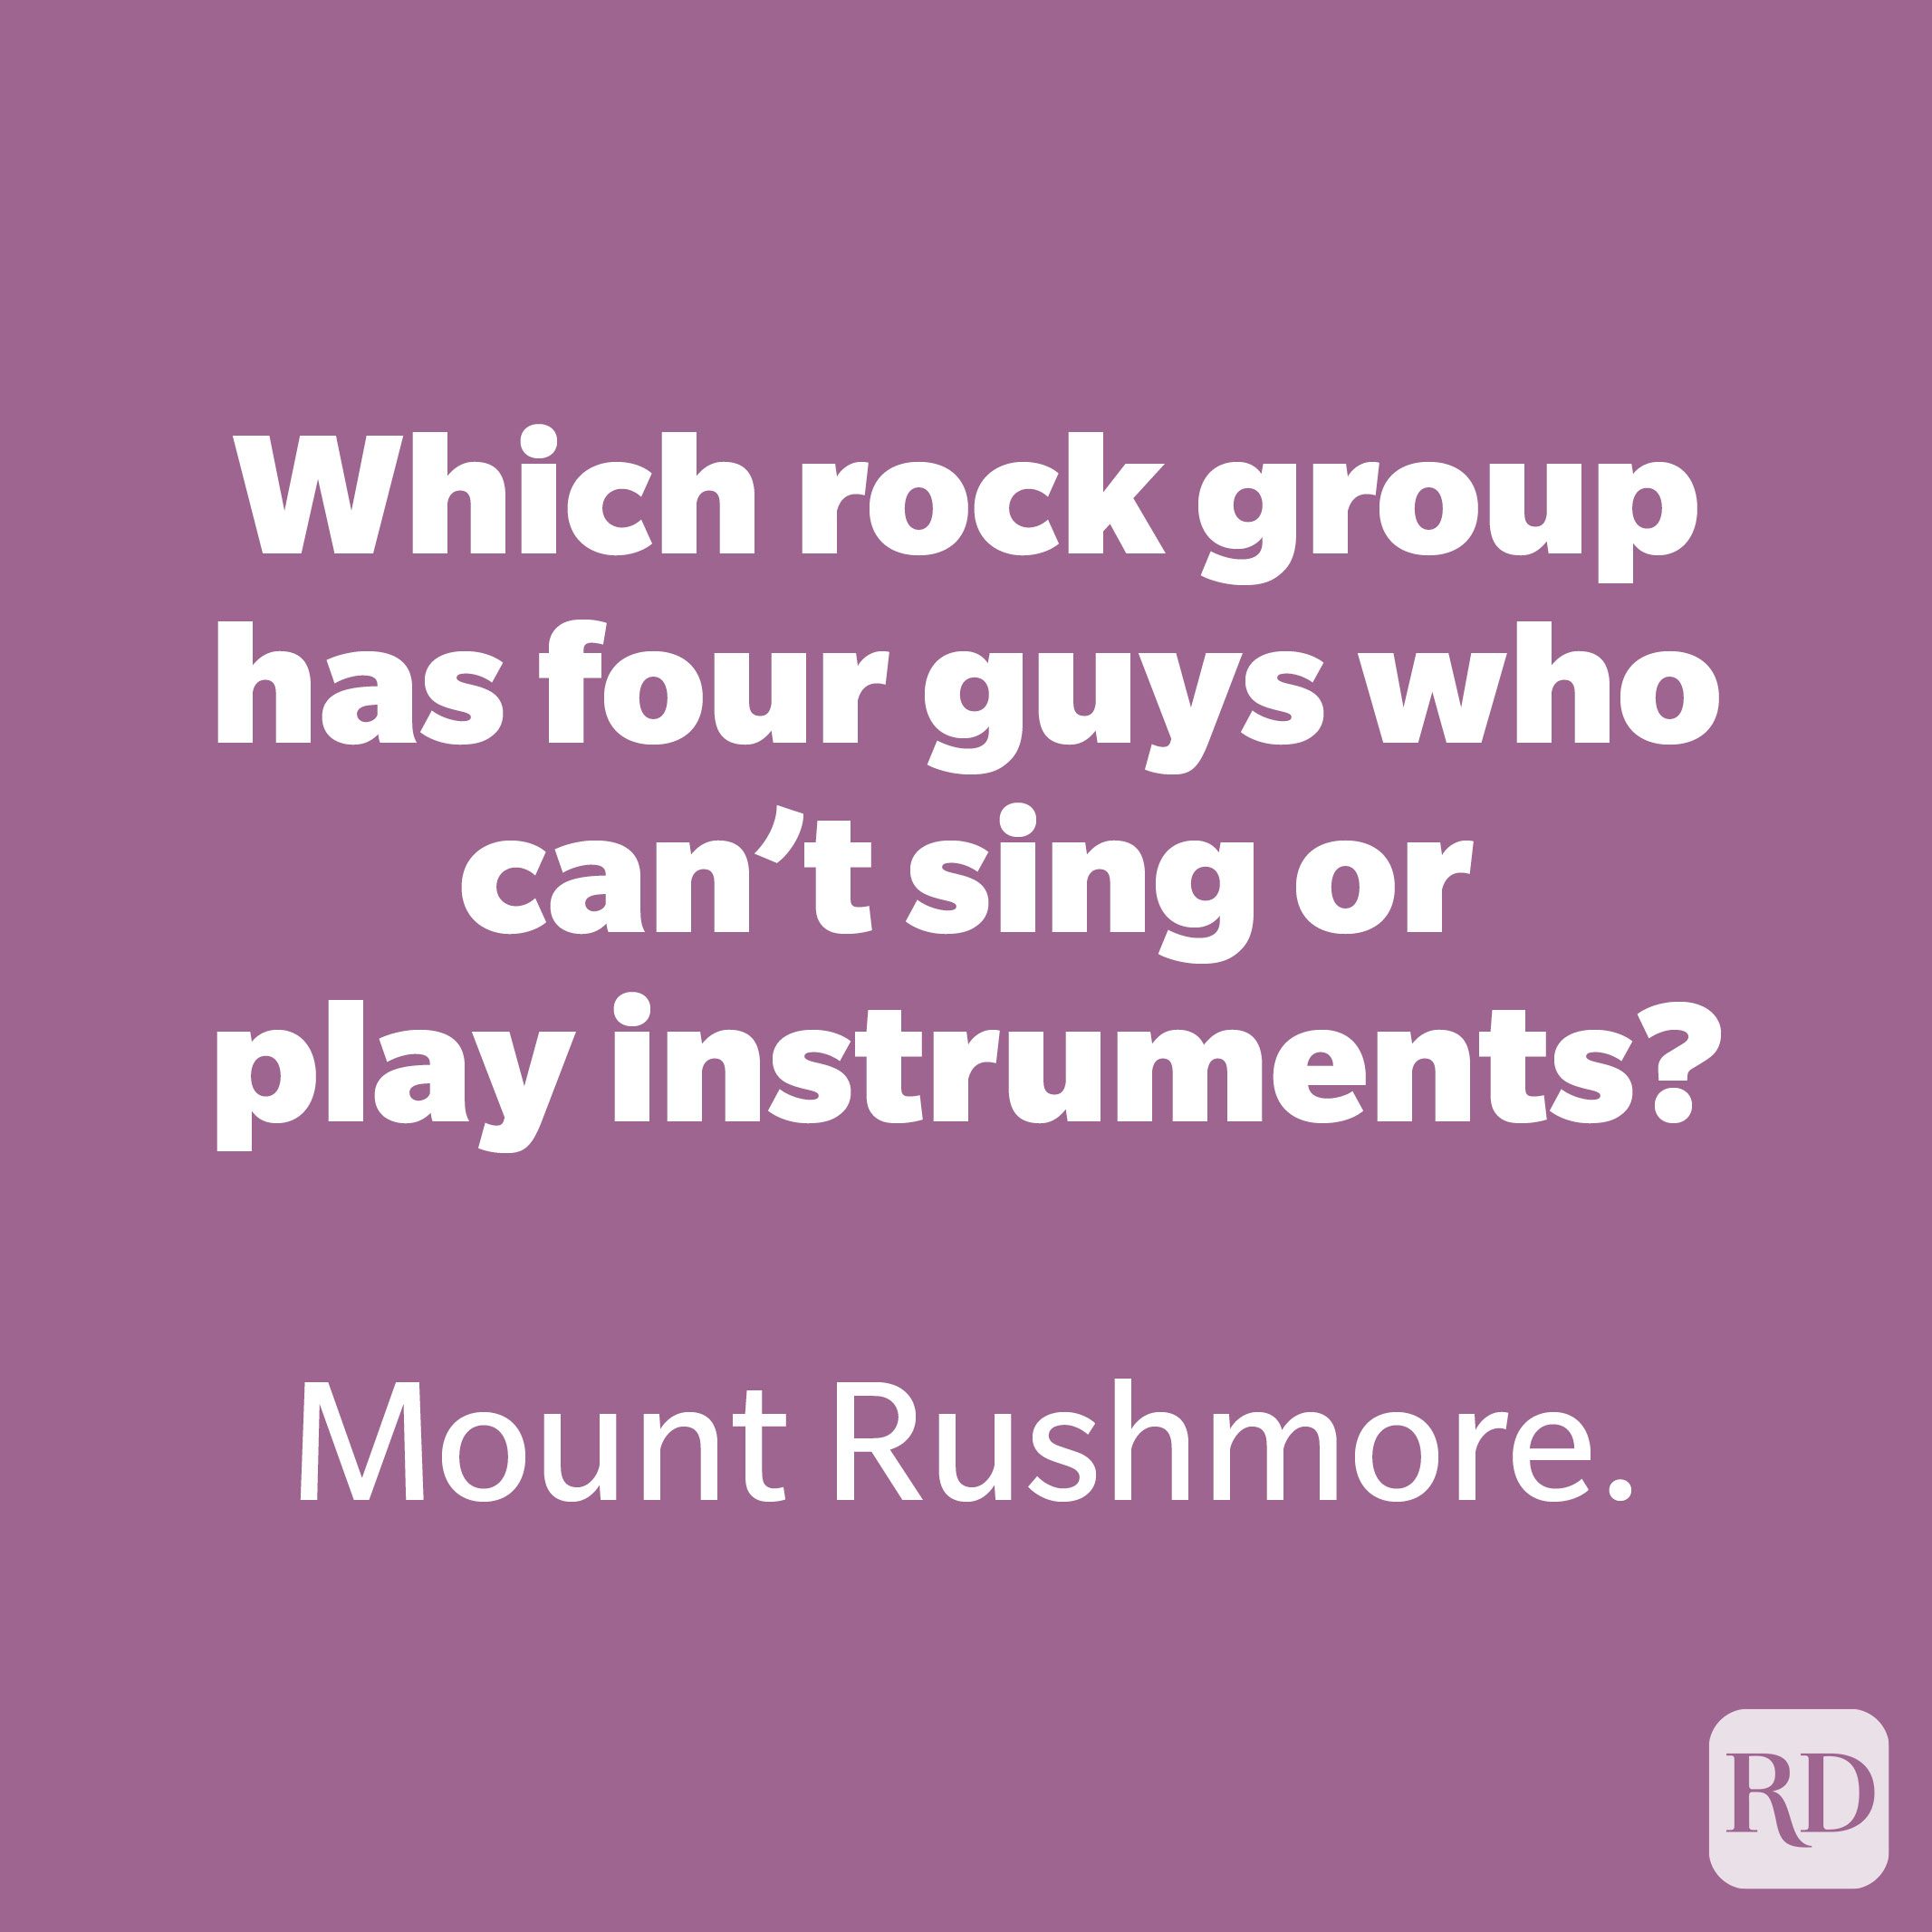 Which rock group has four guys who can’t sing or play instruments?